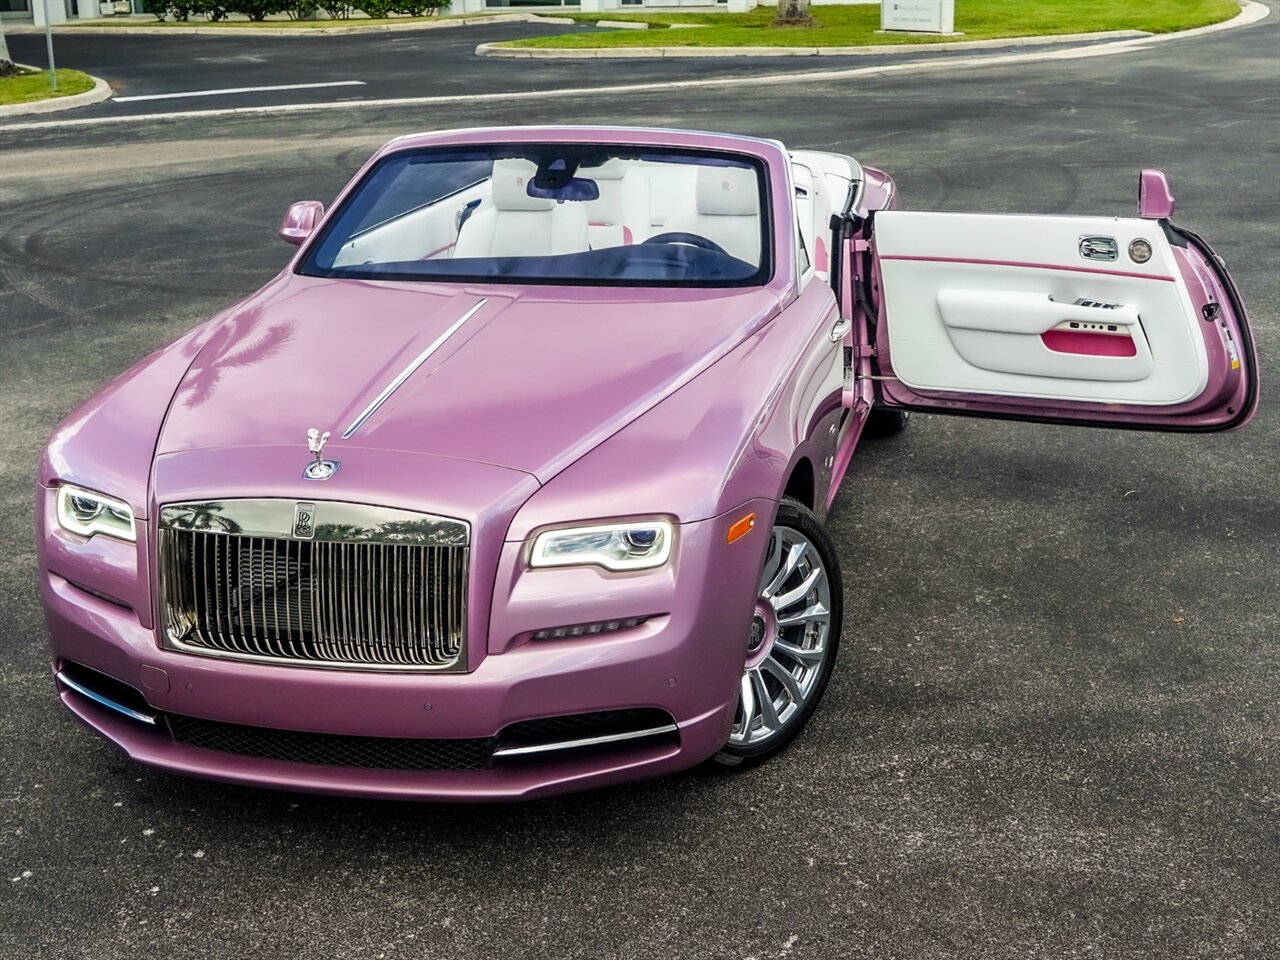 New photos of the exclusive RollsRoyce Dawn in Fuxia